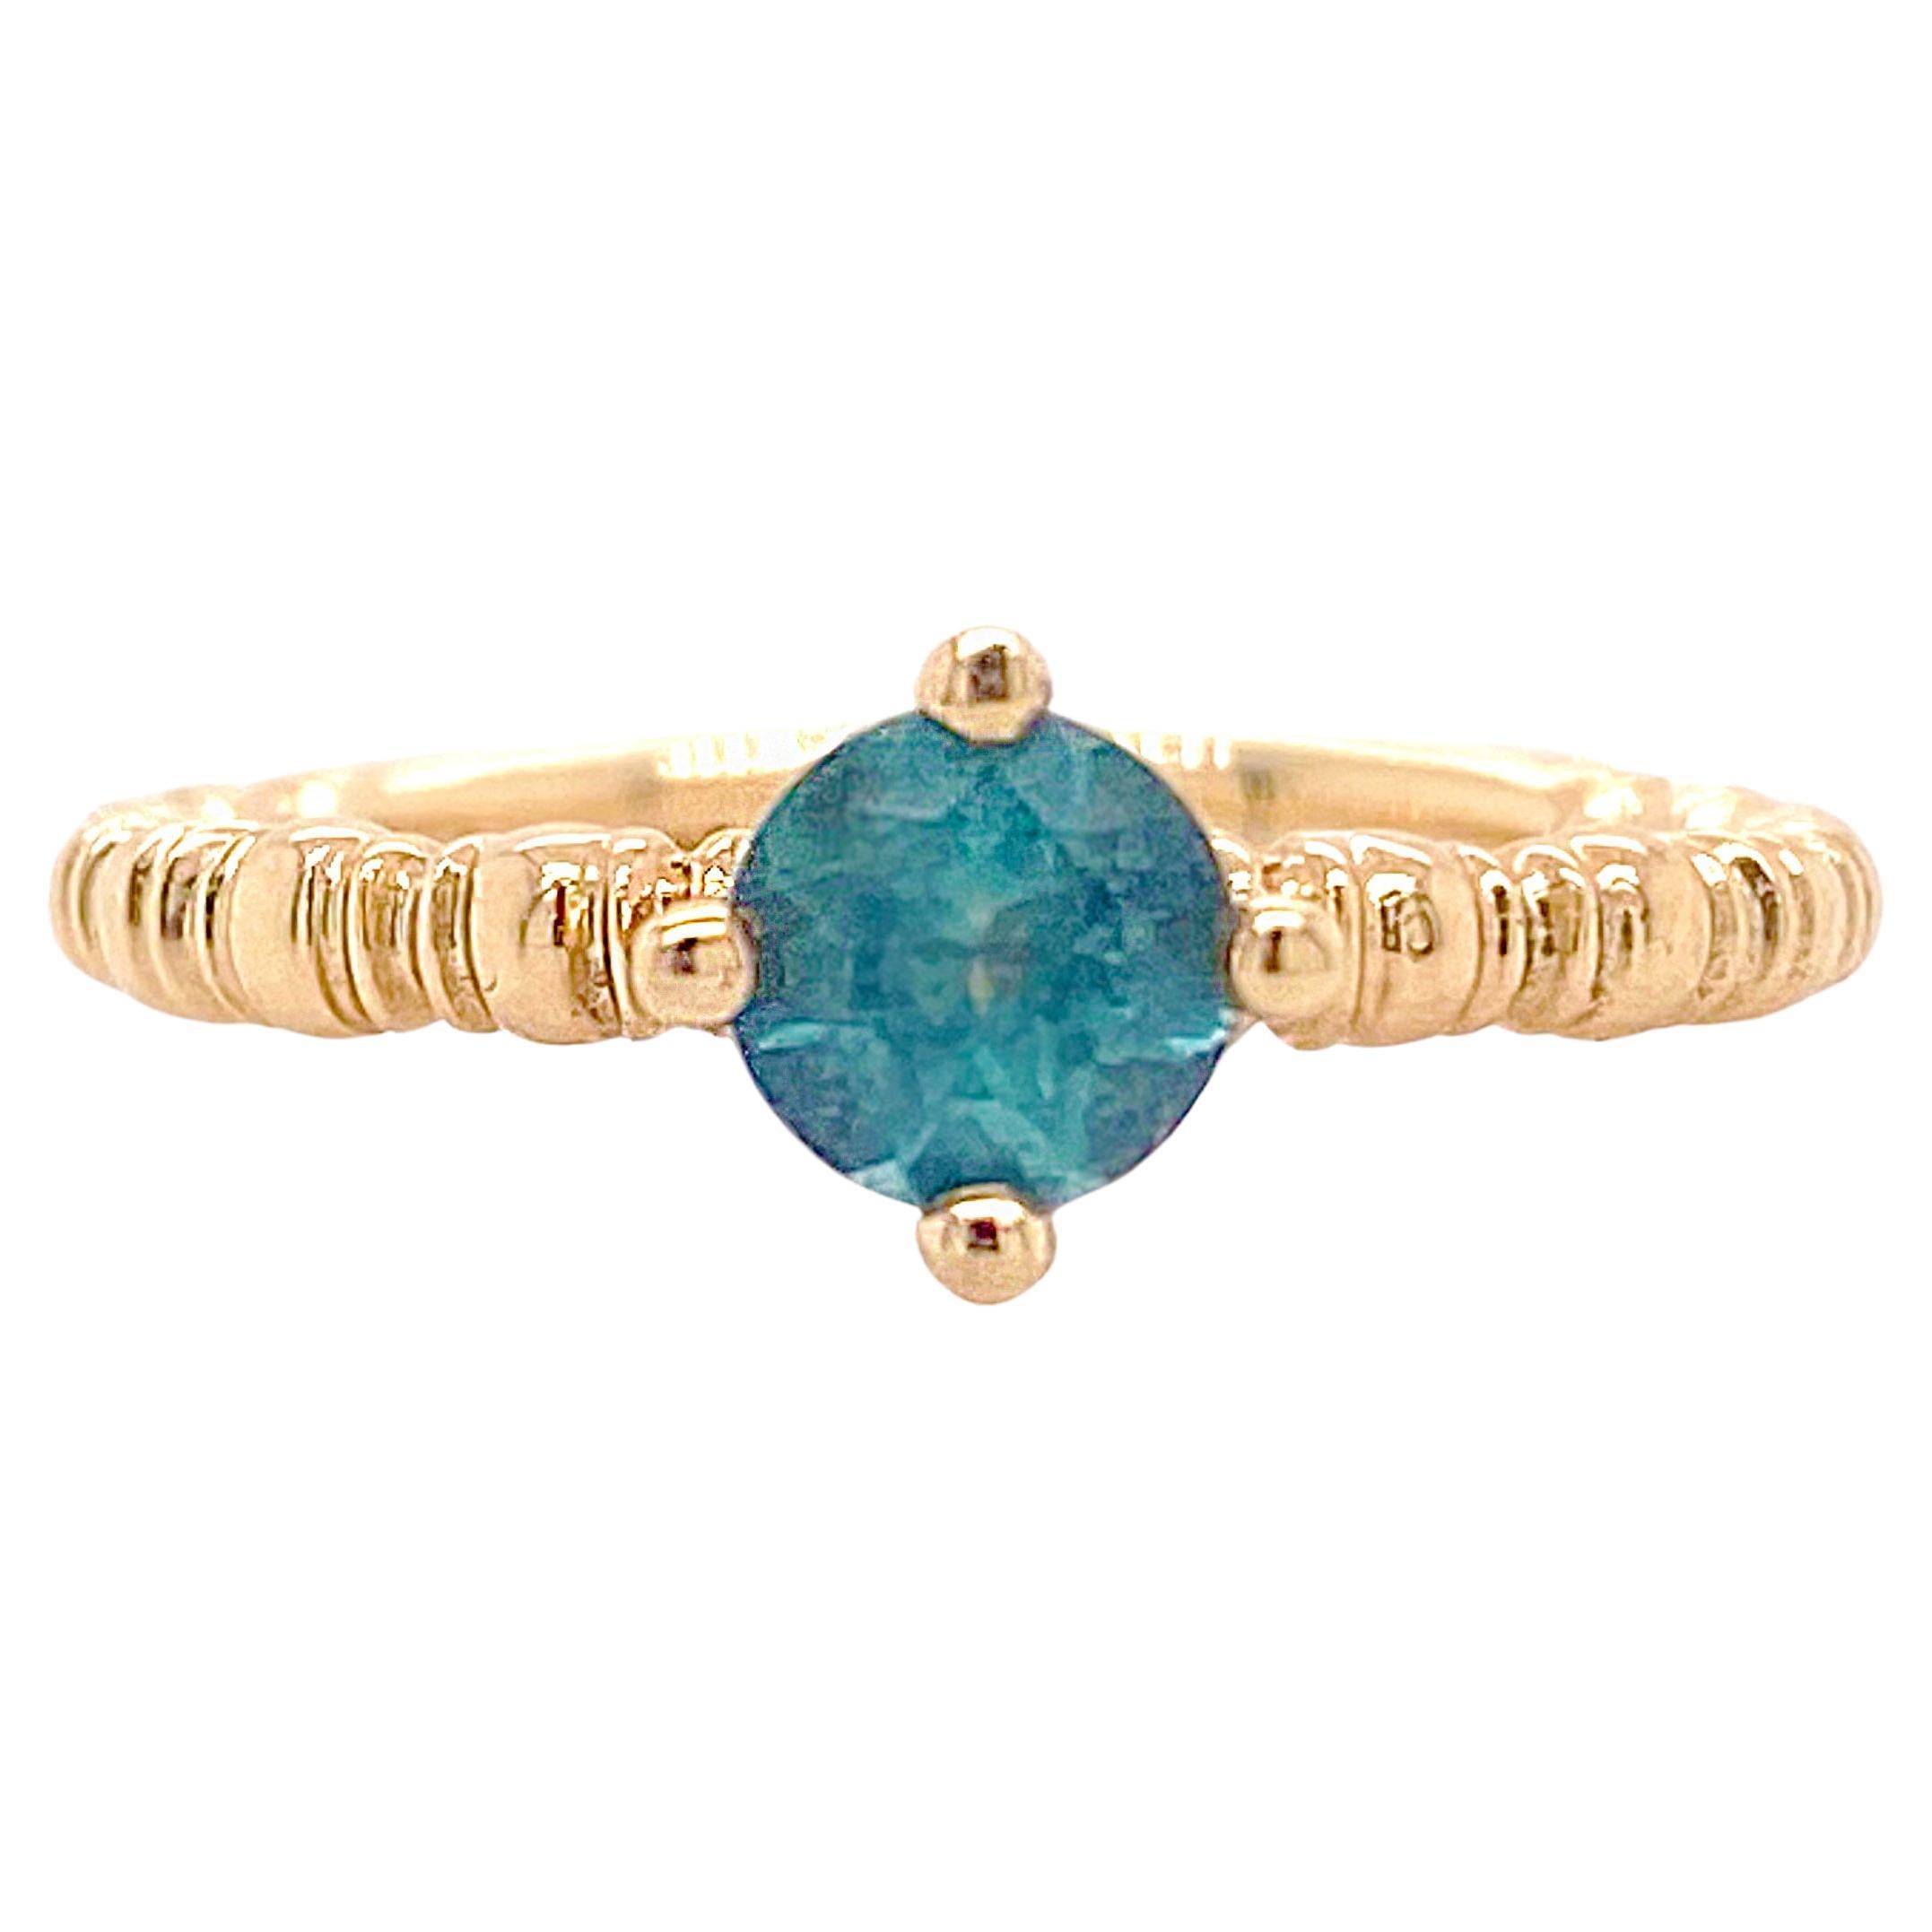 Solitaire Apatite Ring, Yellow Gold, Textured Band with Genuine Vibrant Apatite For Sale